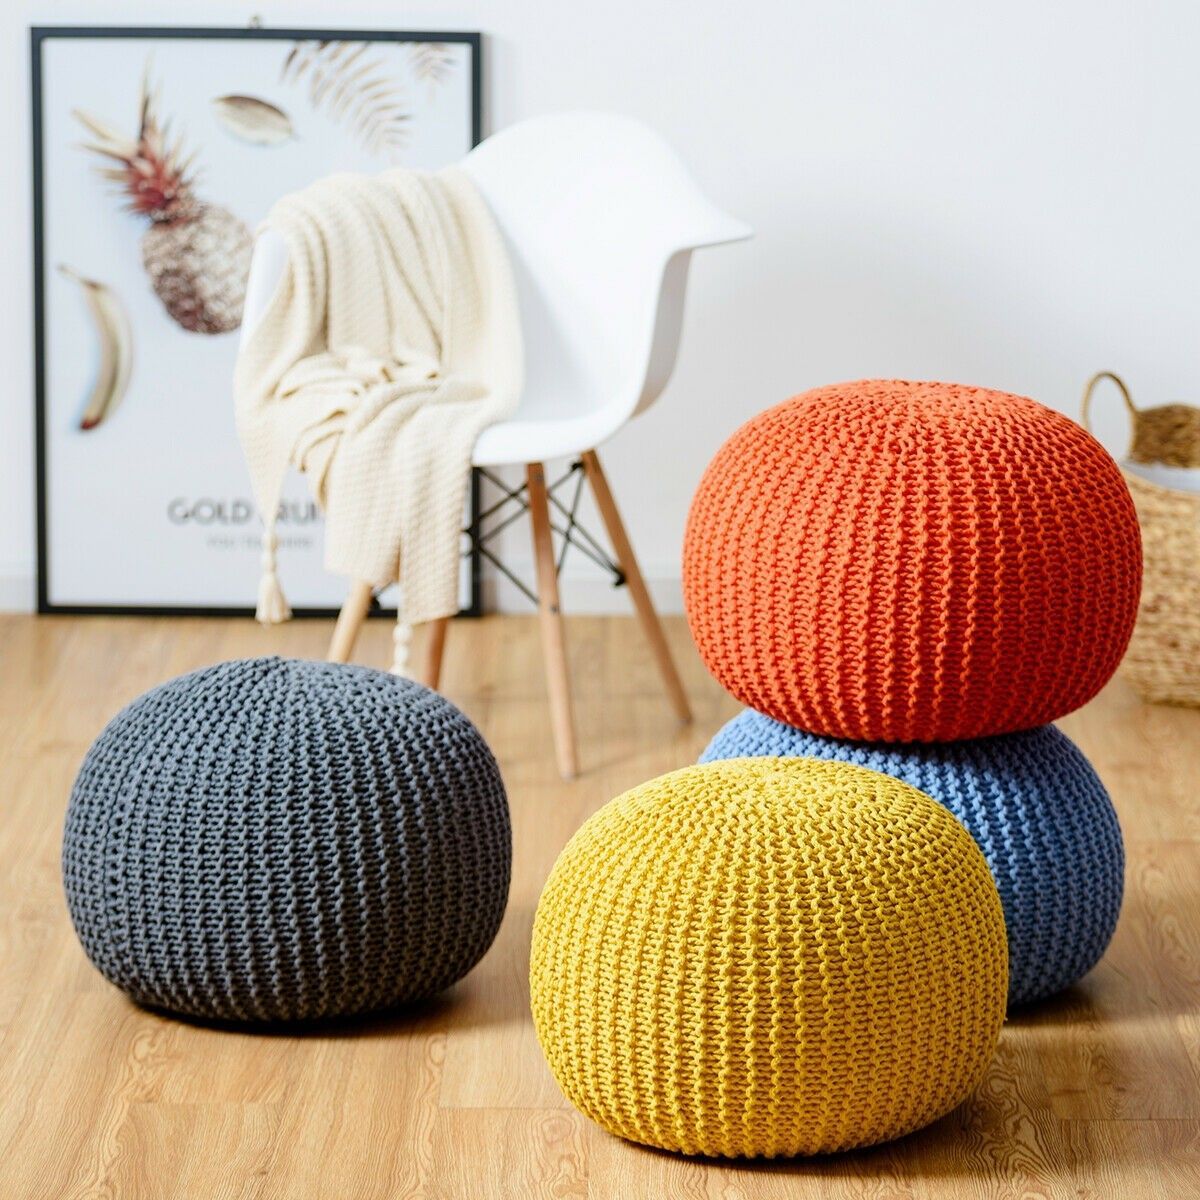 100% Cotton Hand Knitted Pouf Floor Seating Ottoman | Floor Seating Throughout Cream Cotton Knitted Pouf Ottomans (View 3 of 20)